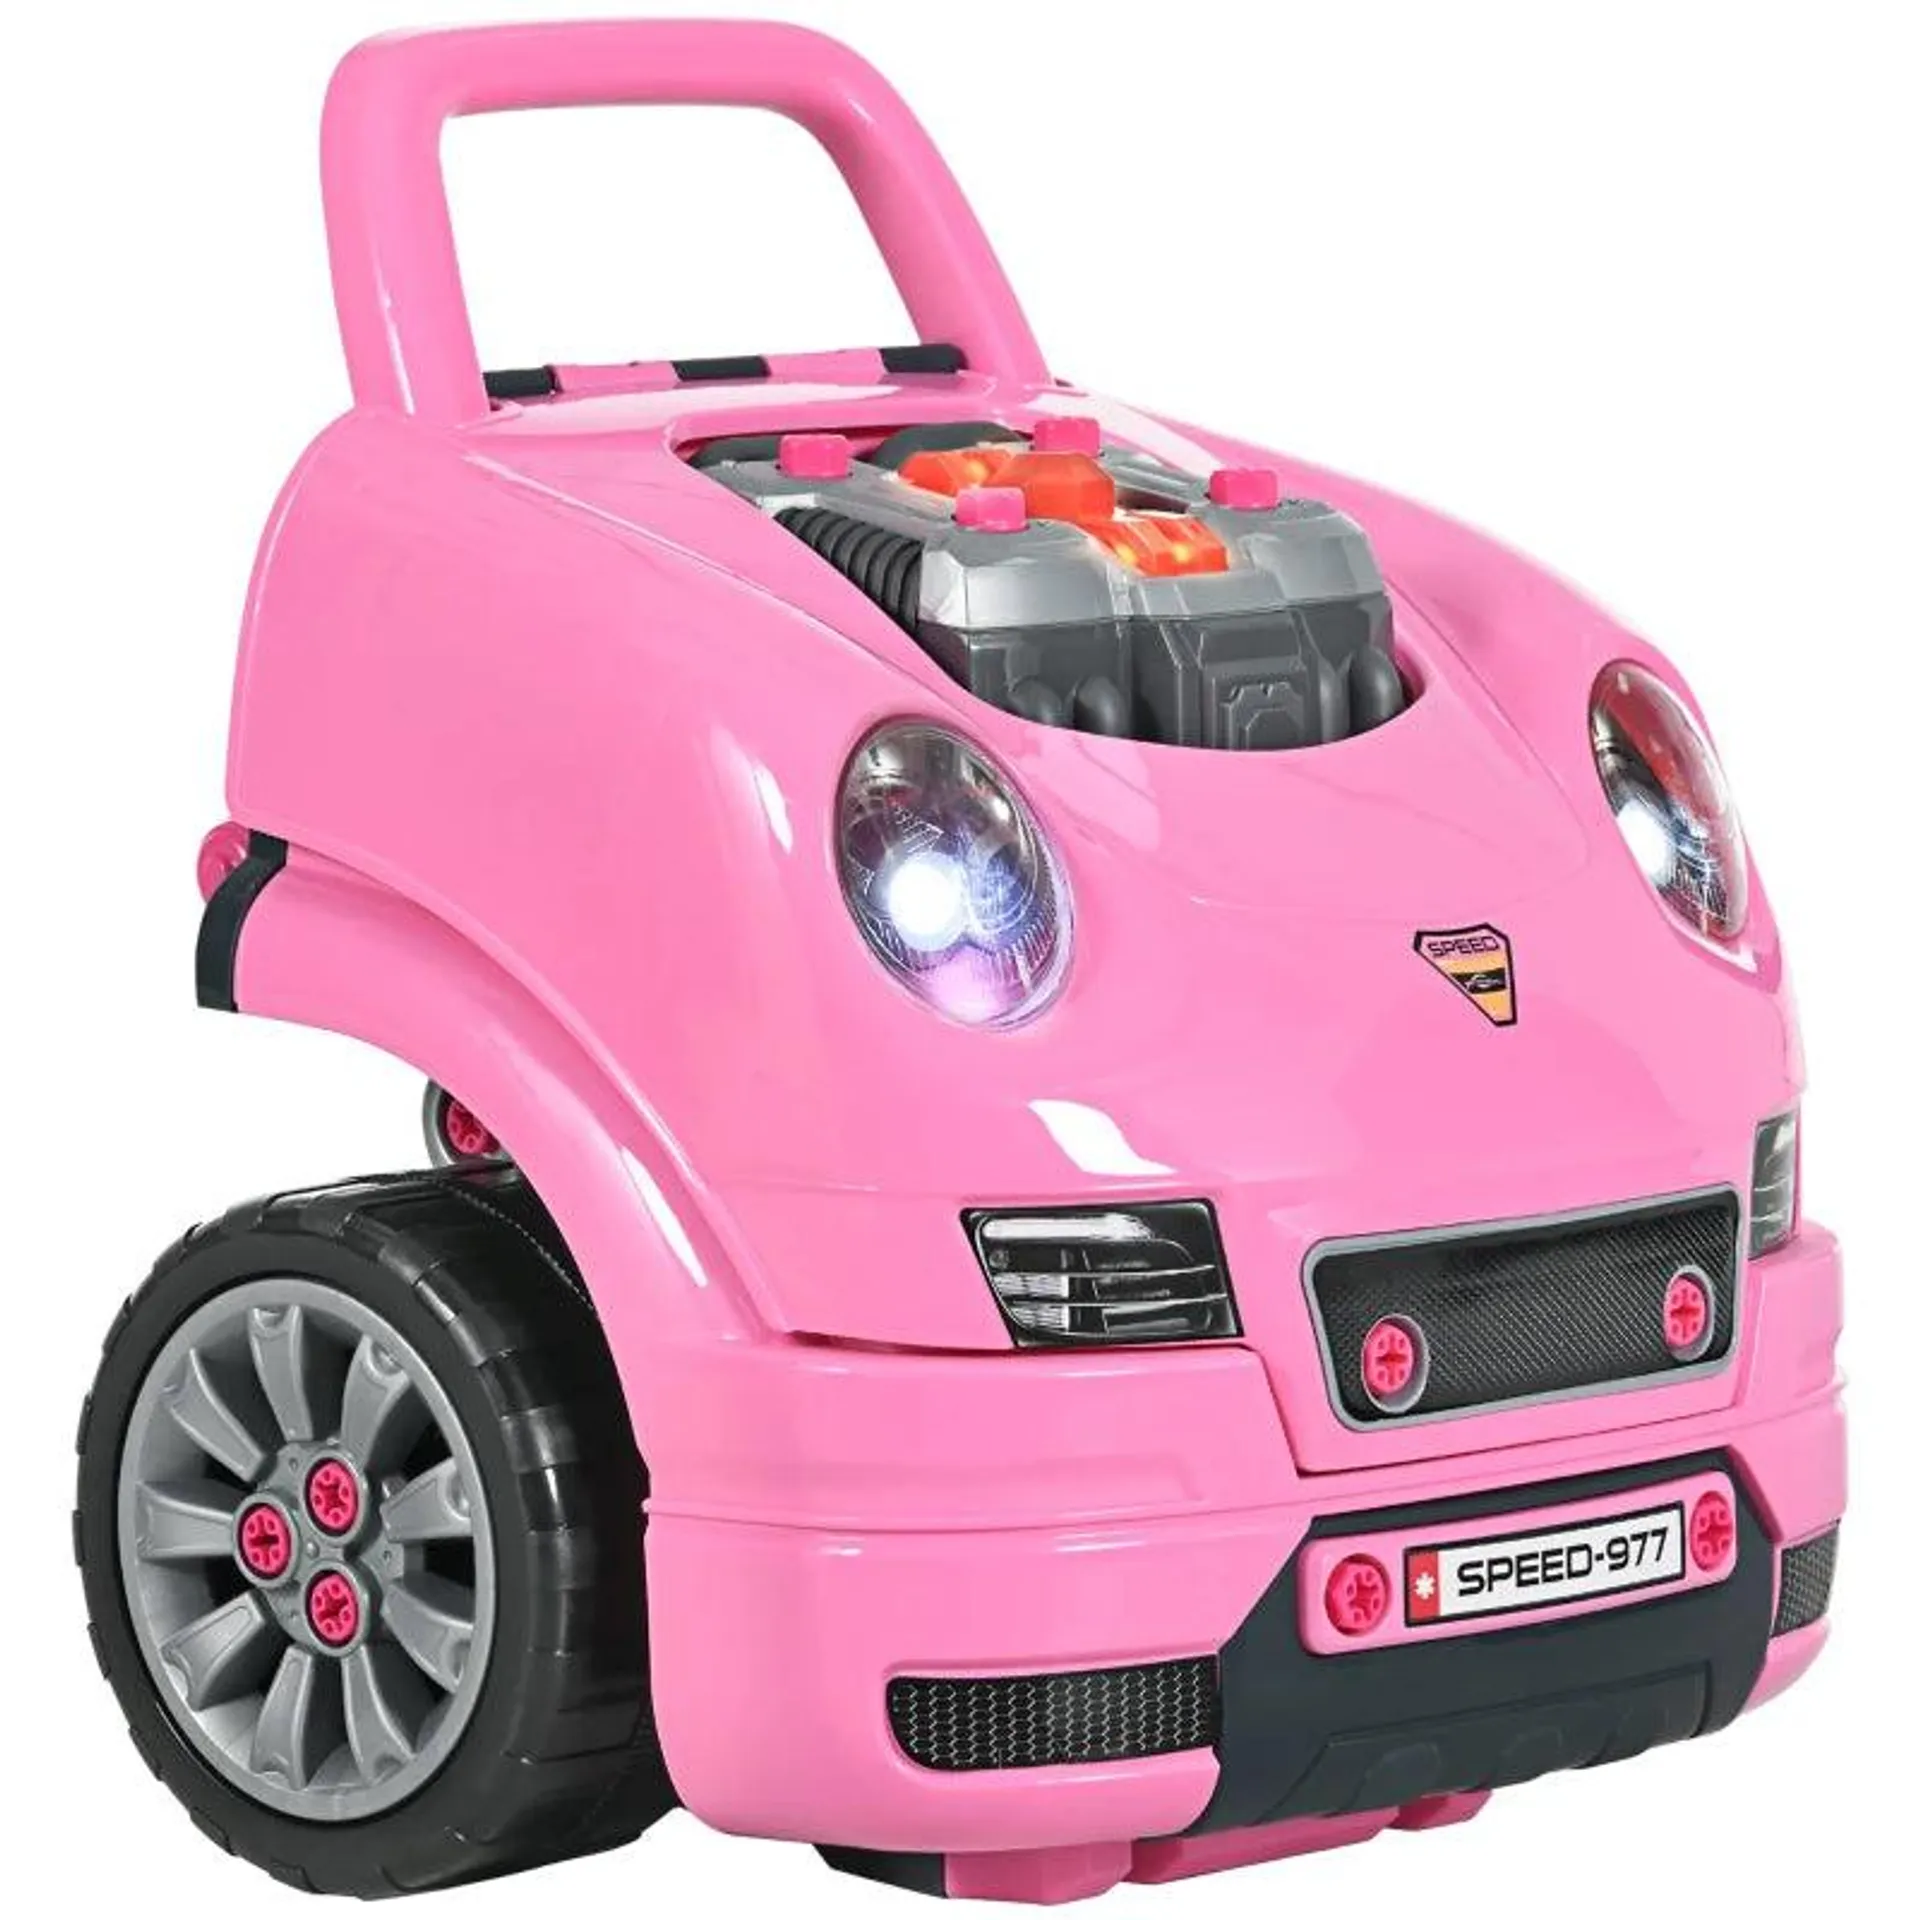 HOMCOM Children's Truck Engine for Ages 3-5 Years - Pink